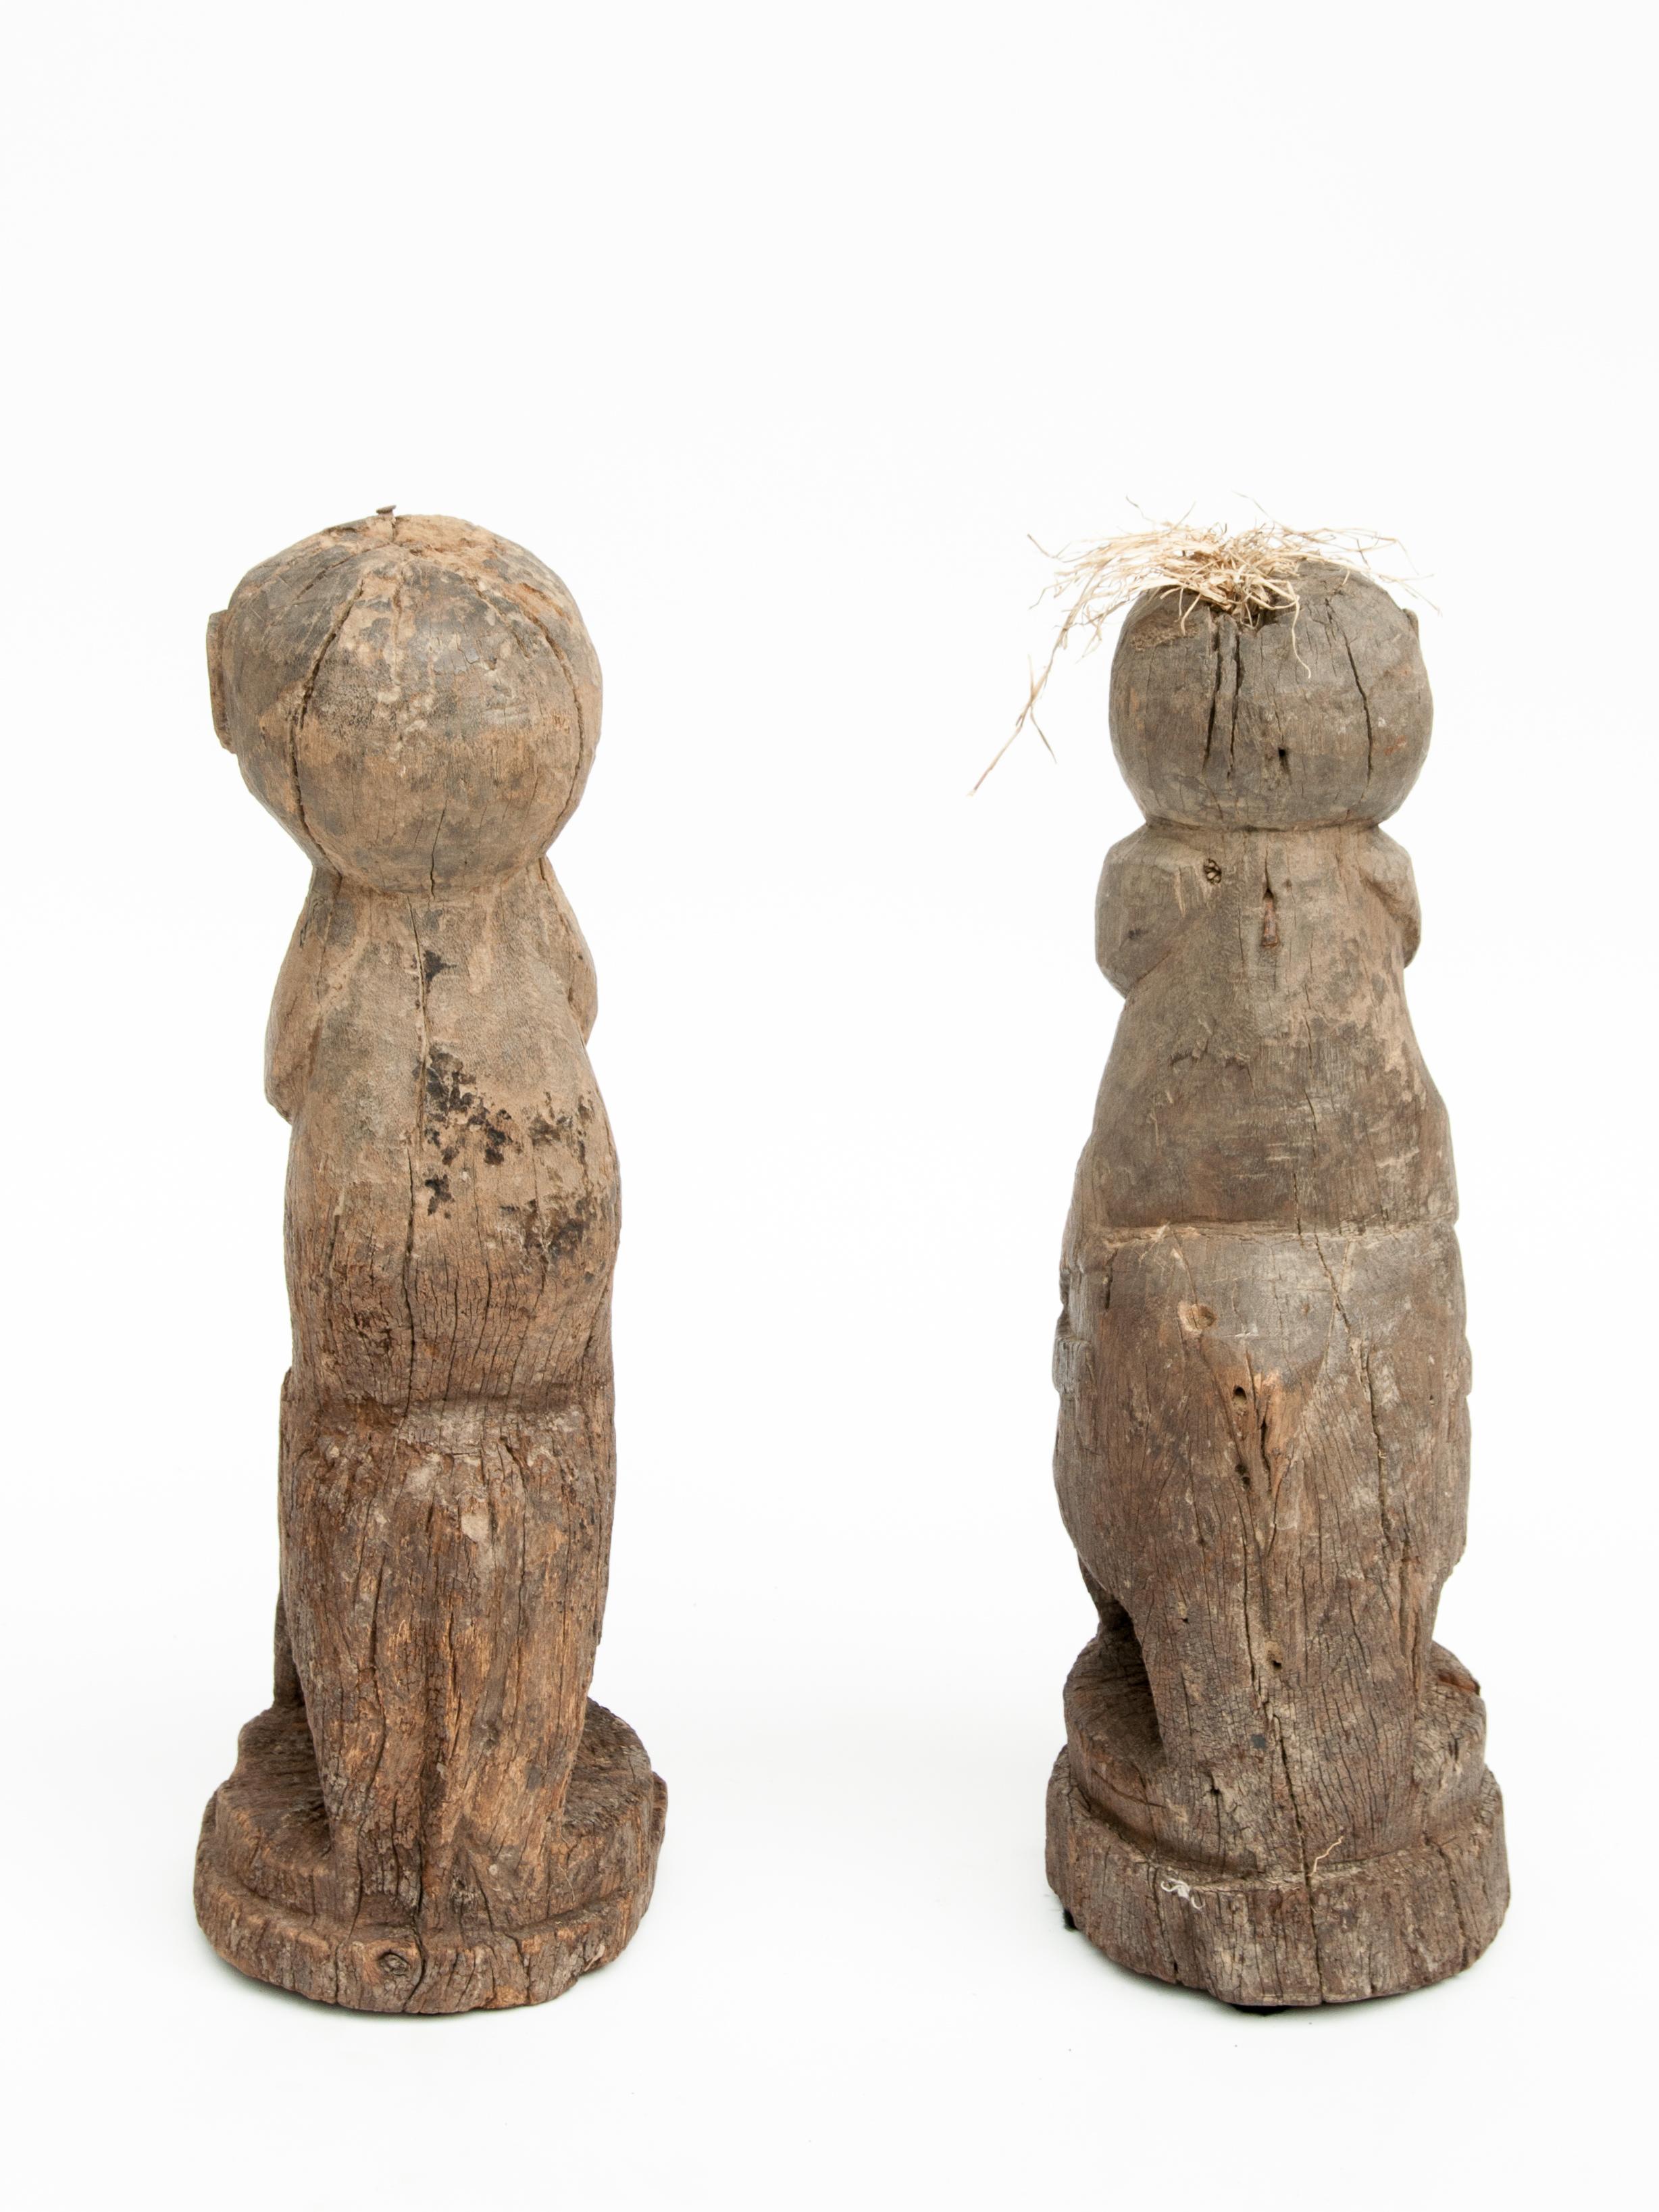 Hand-Carved Pair of Tribal Statues Riders on Elephants West Nepal Early to Mid-20th Century